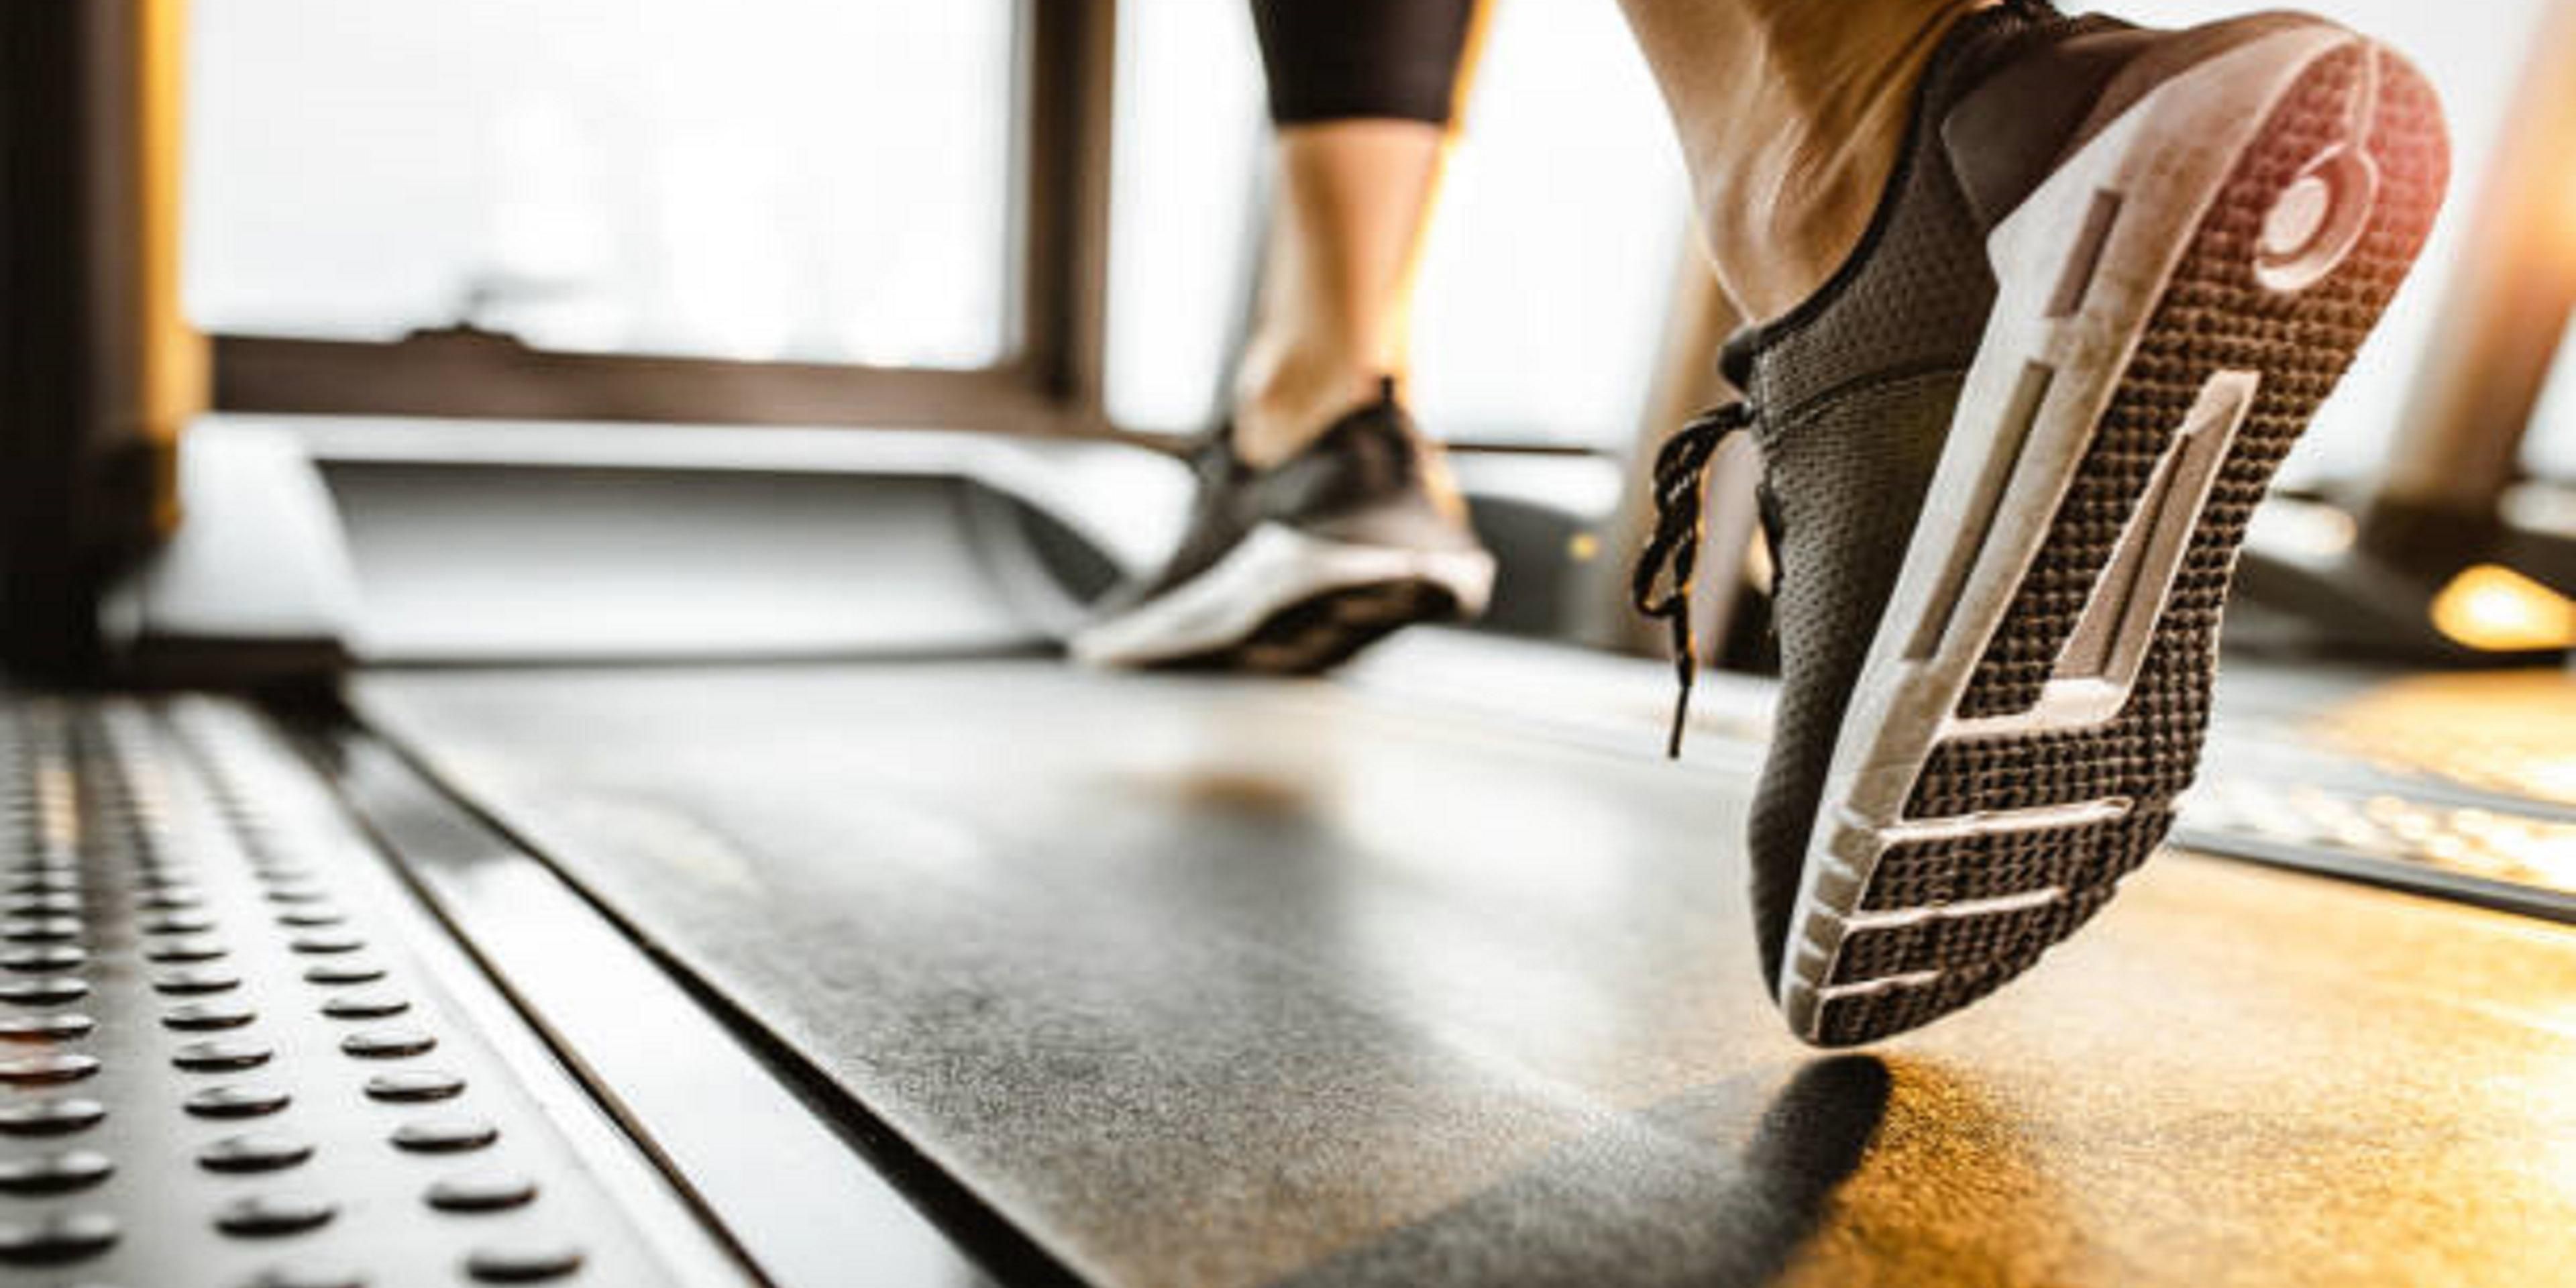 Get your sweat on in our complimentary, fully equipped fitness center with elliptical machines, free weights, stationary bicycle and treadmill, open 24 hours.